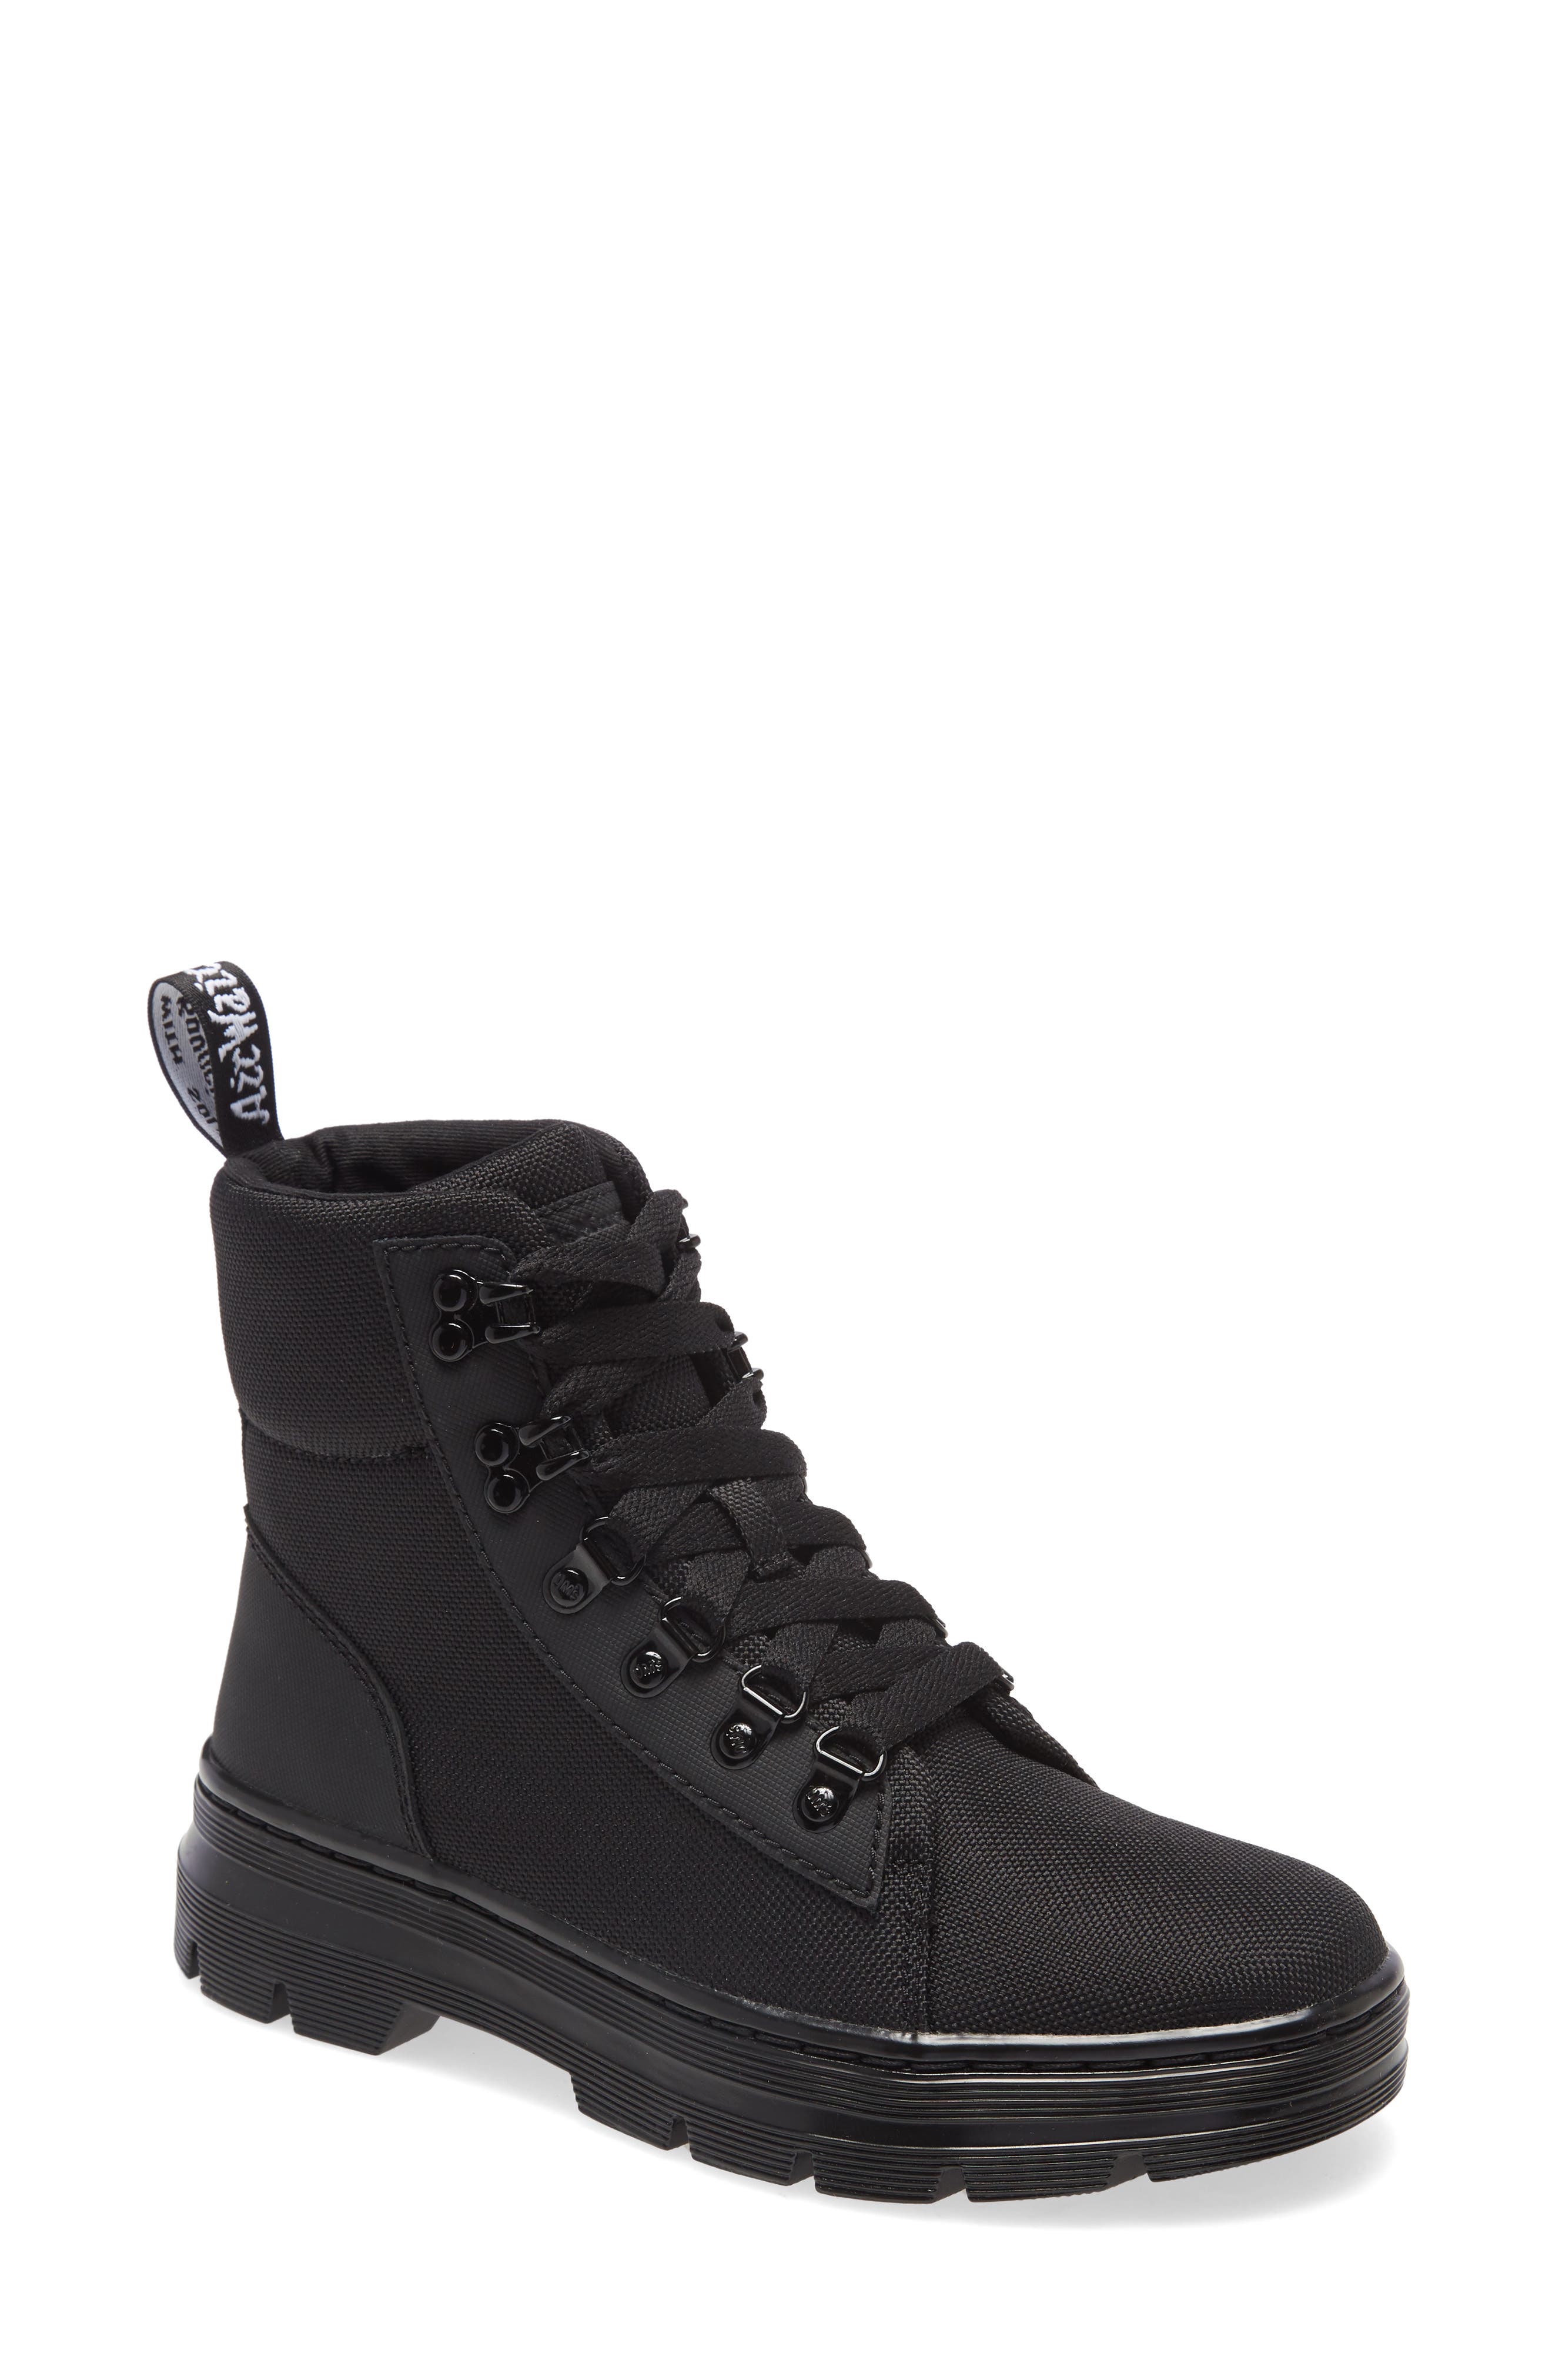 Dr. Martens Combs Boot in Black at Nordstrom, Size 9Us